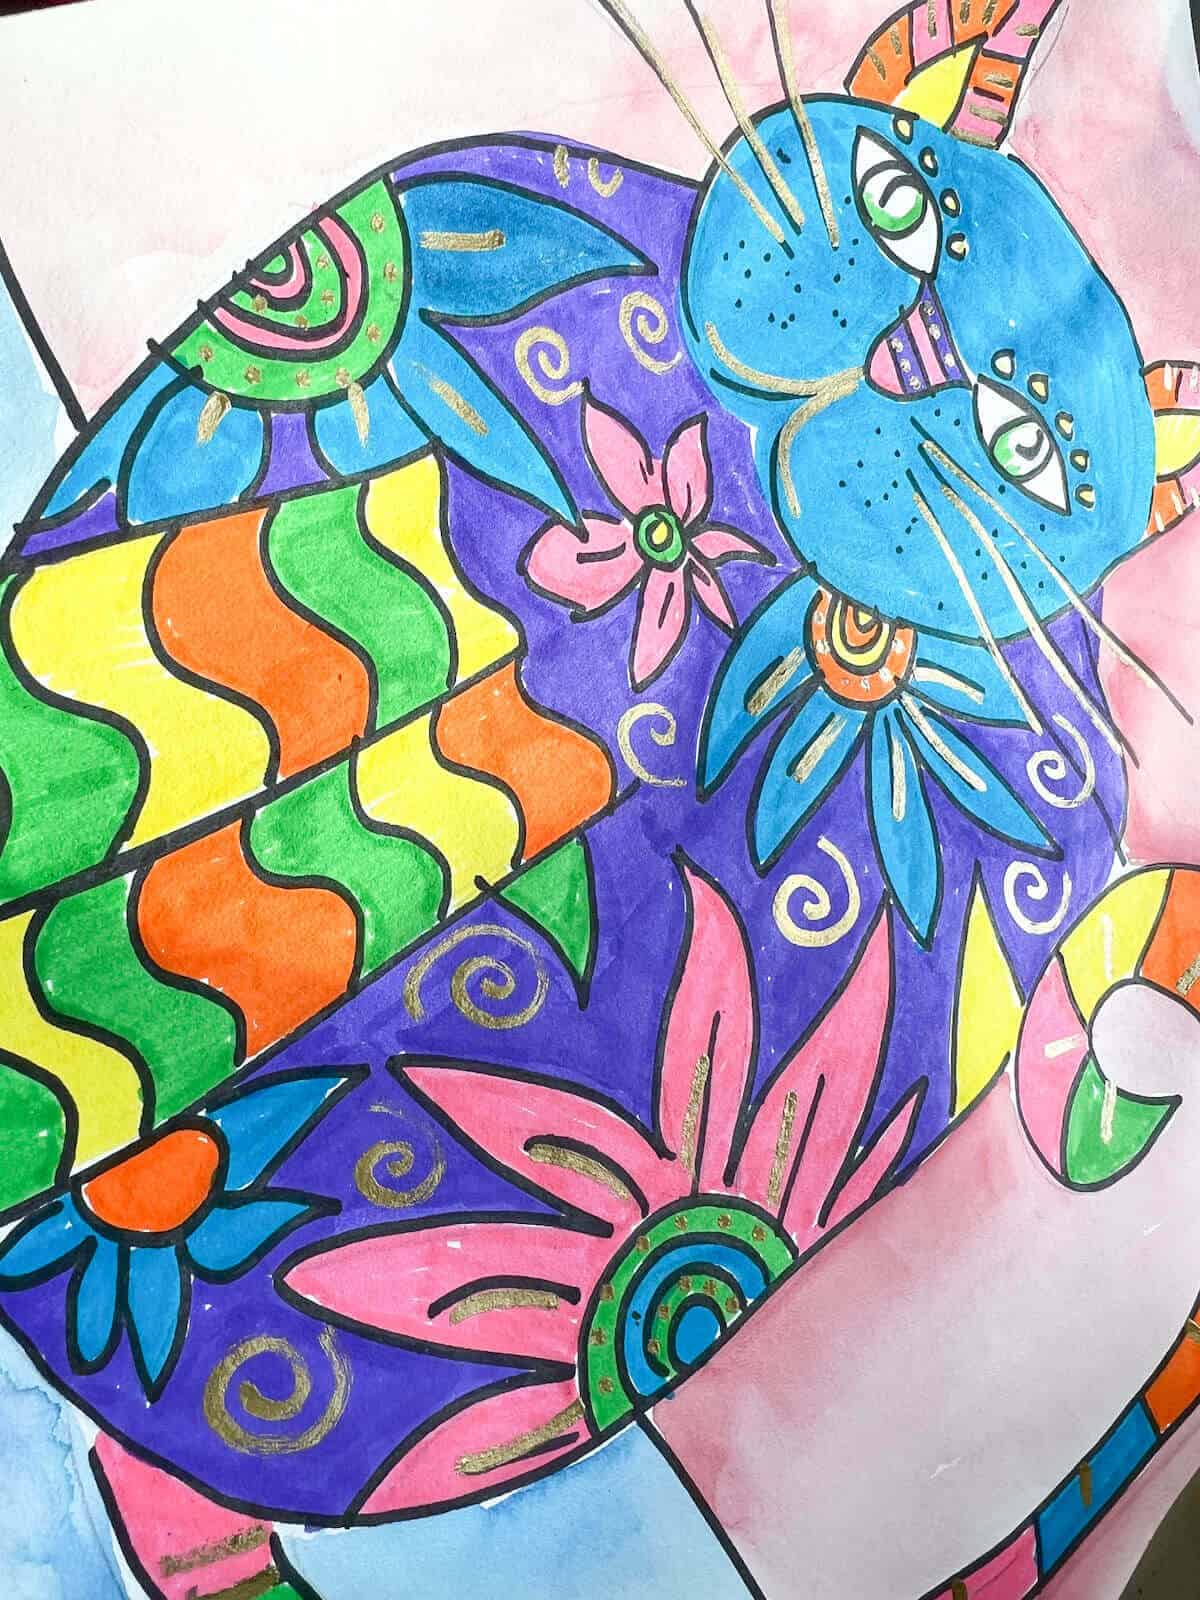 patterned marker drawing of a cat.